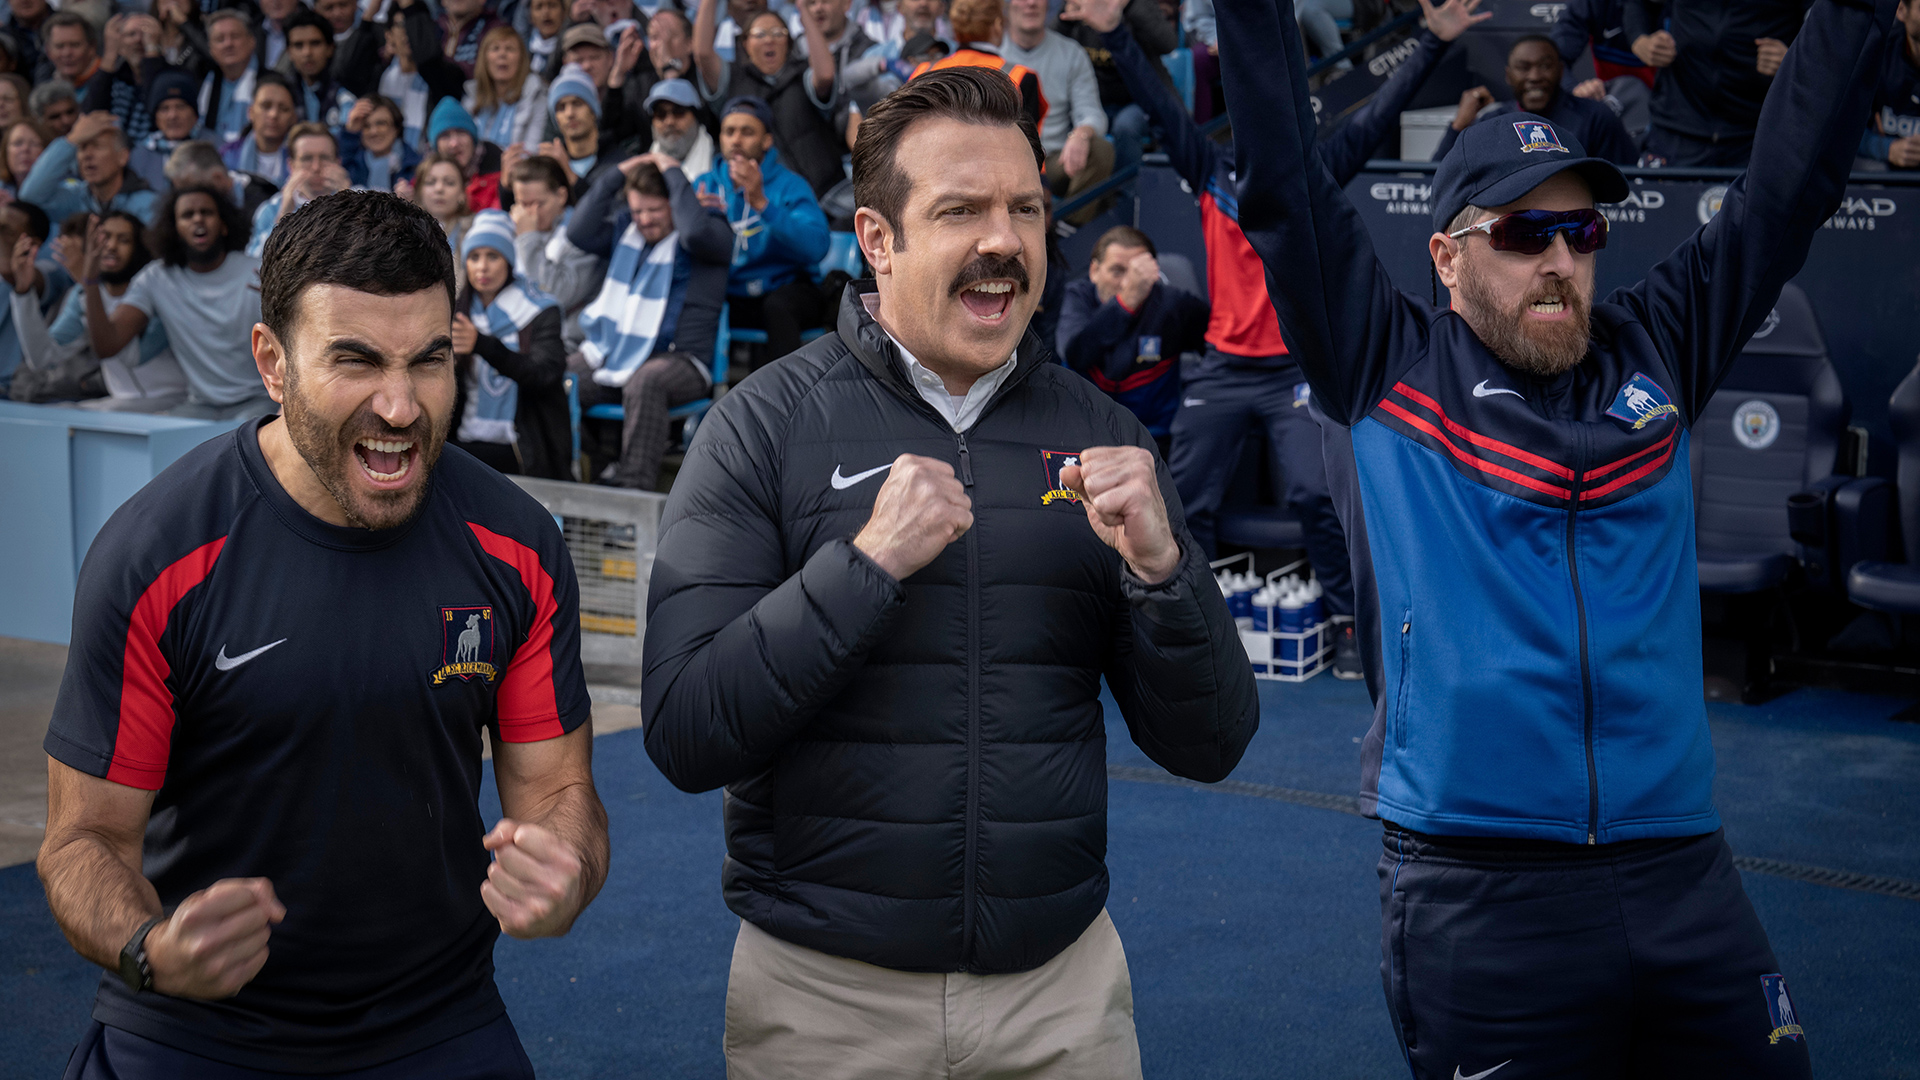 Jason Sudeikis stars as soccer coach Ted Lasso in the Apple TV+ series of the same name (photo courtesy of Apple TV+).